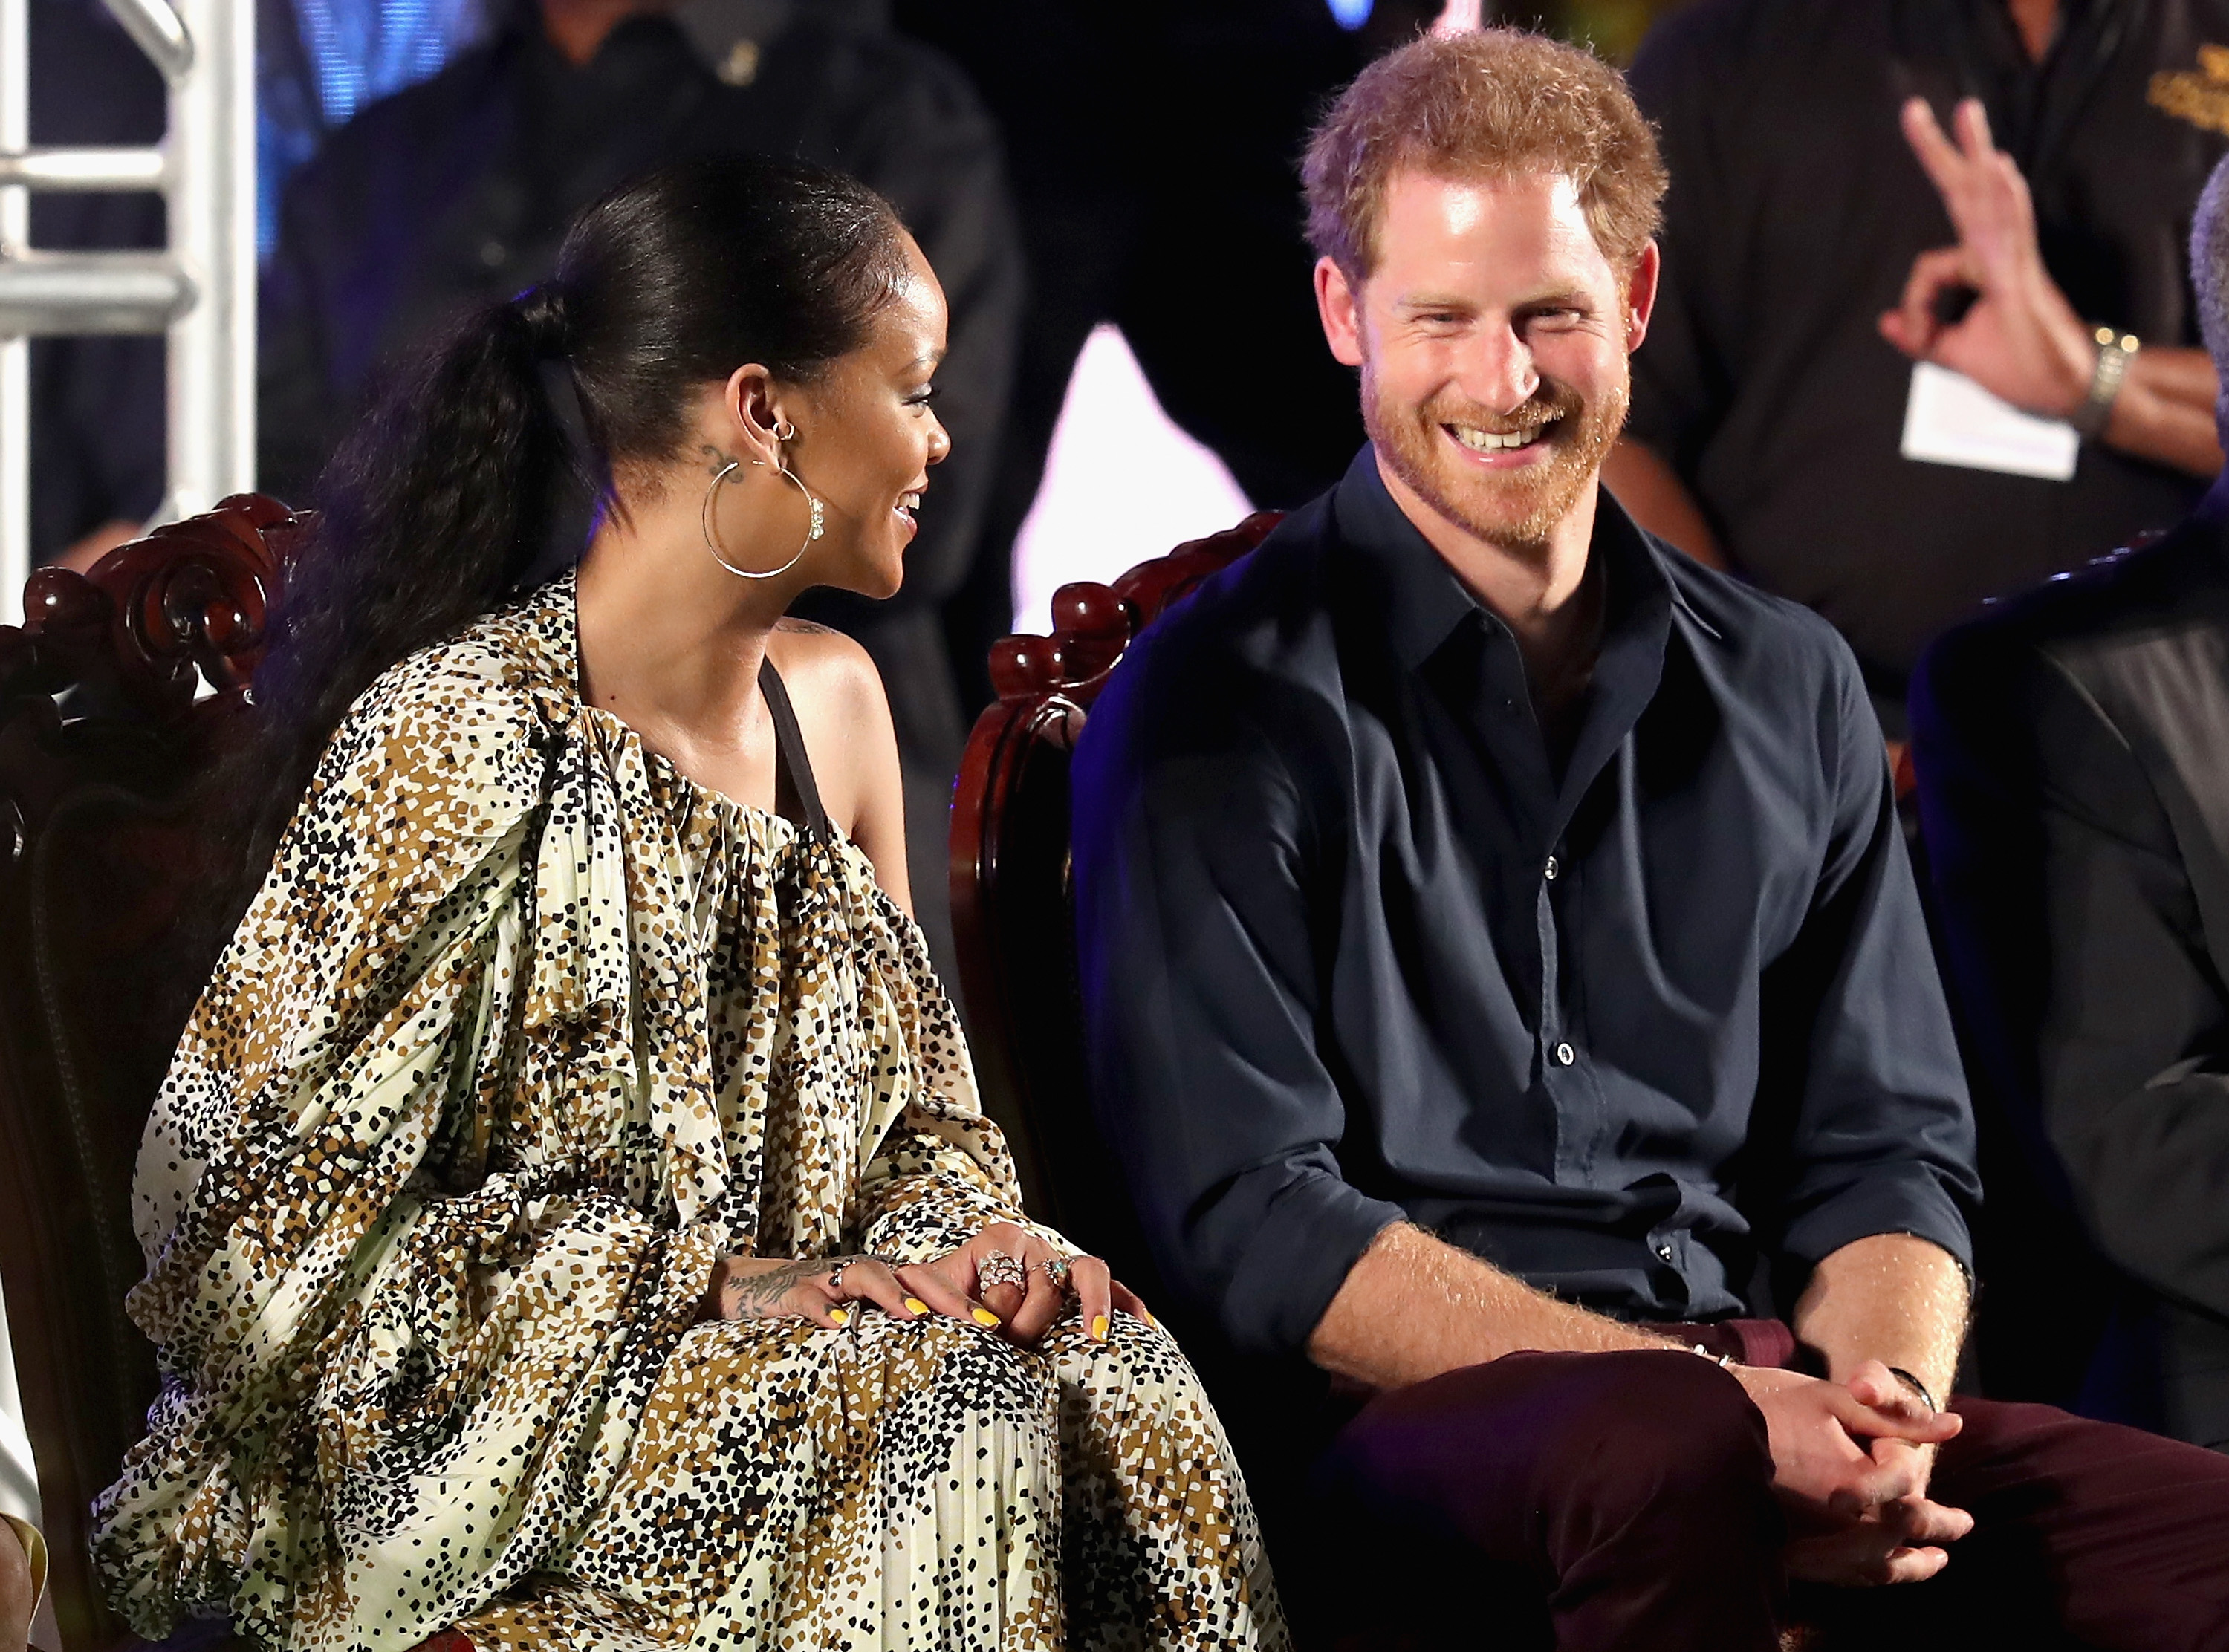 Prince Harry and singer Rihanna attend a concert at the Kensington Oval Cricket Ground on day 10 of an official visit to the Caribbean on November 30, 2016 in  Bridgetown, Barbados. (Chris Jackson—Getty Images)